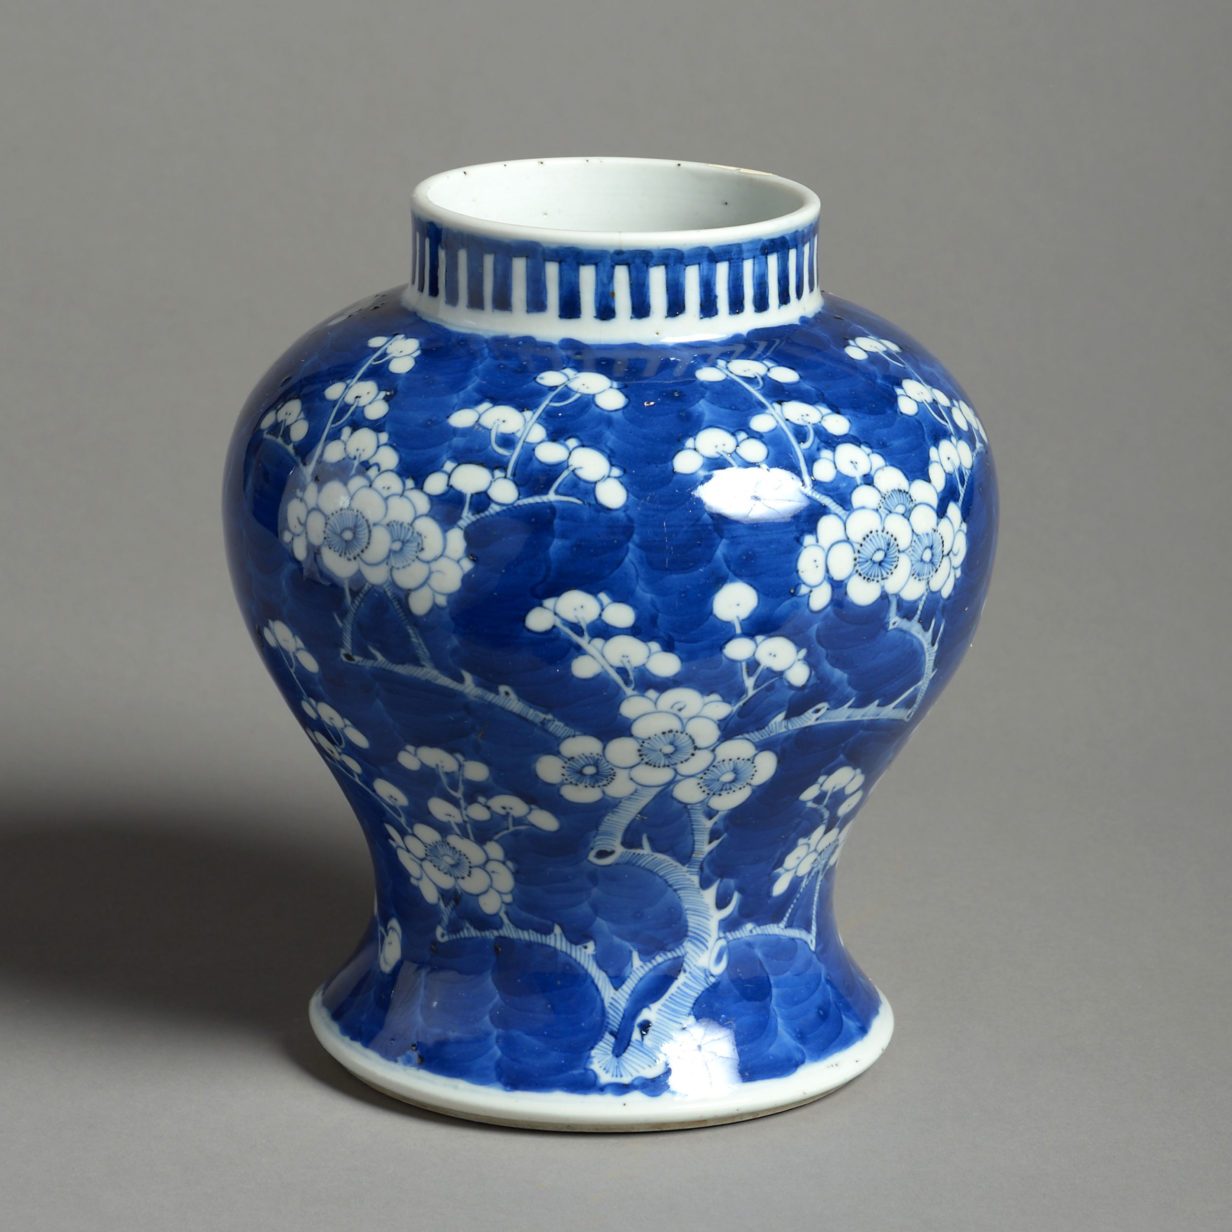 A 19th century blue and white porcelain vase